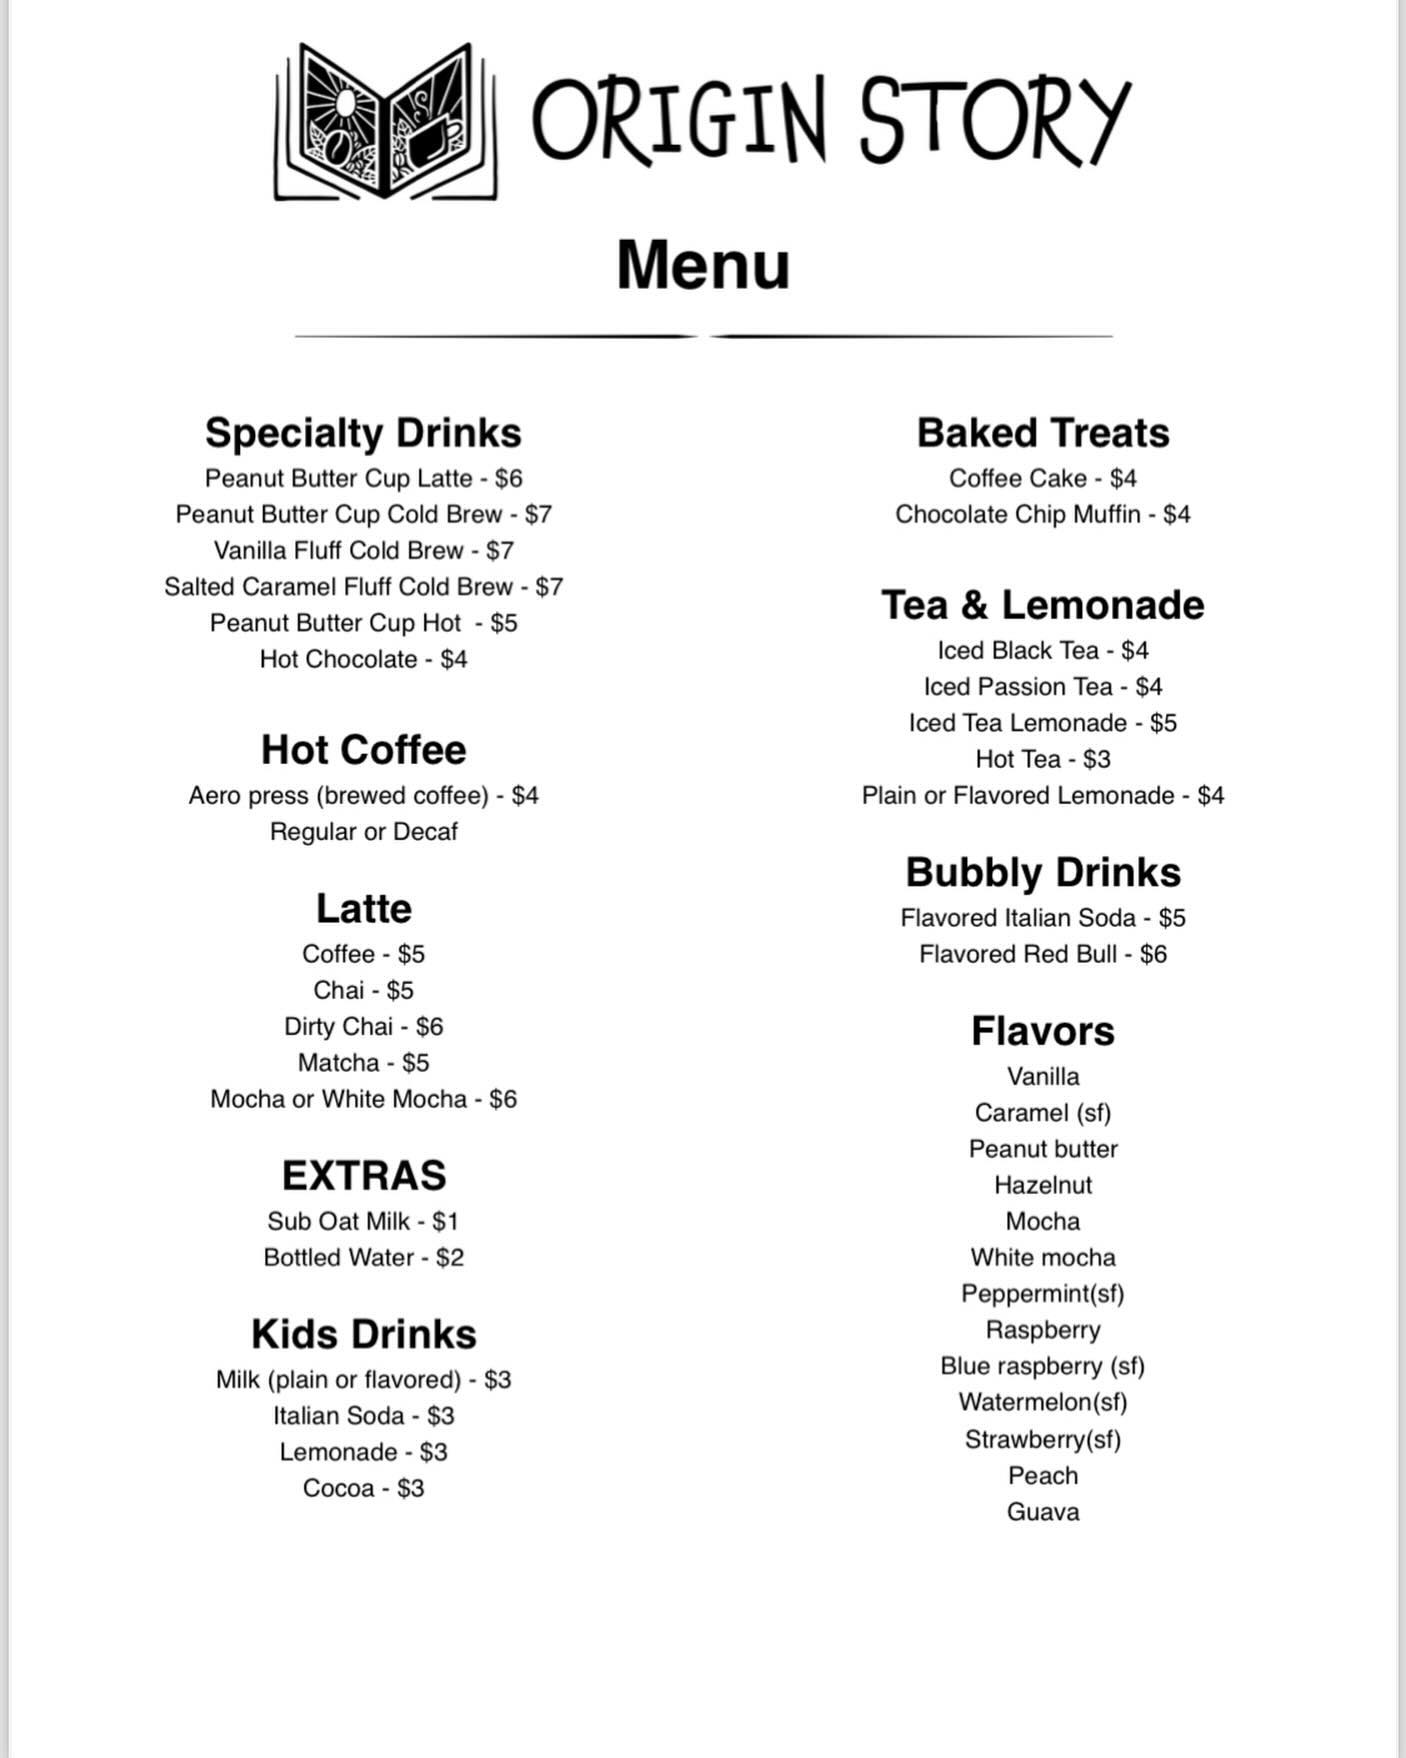 March Menu! Come grab a Peanut Butter Cup Latte or Cold Brew! Downtown at the Bike Peddler today at 10am!